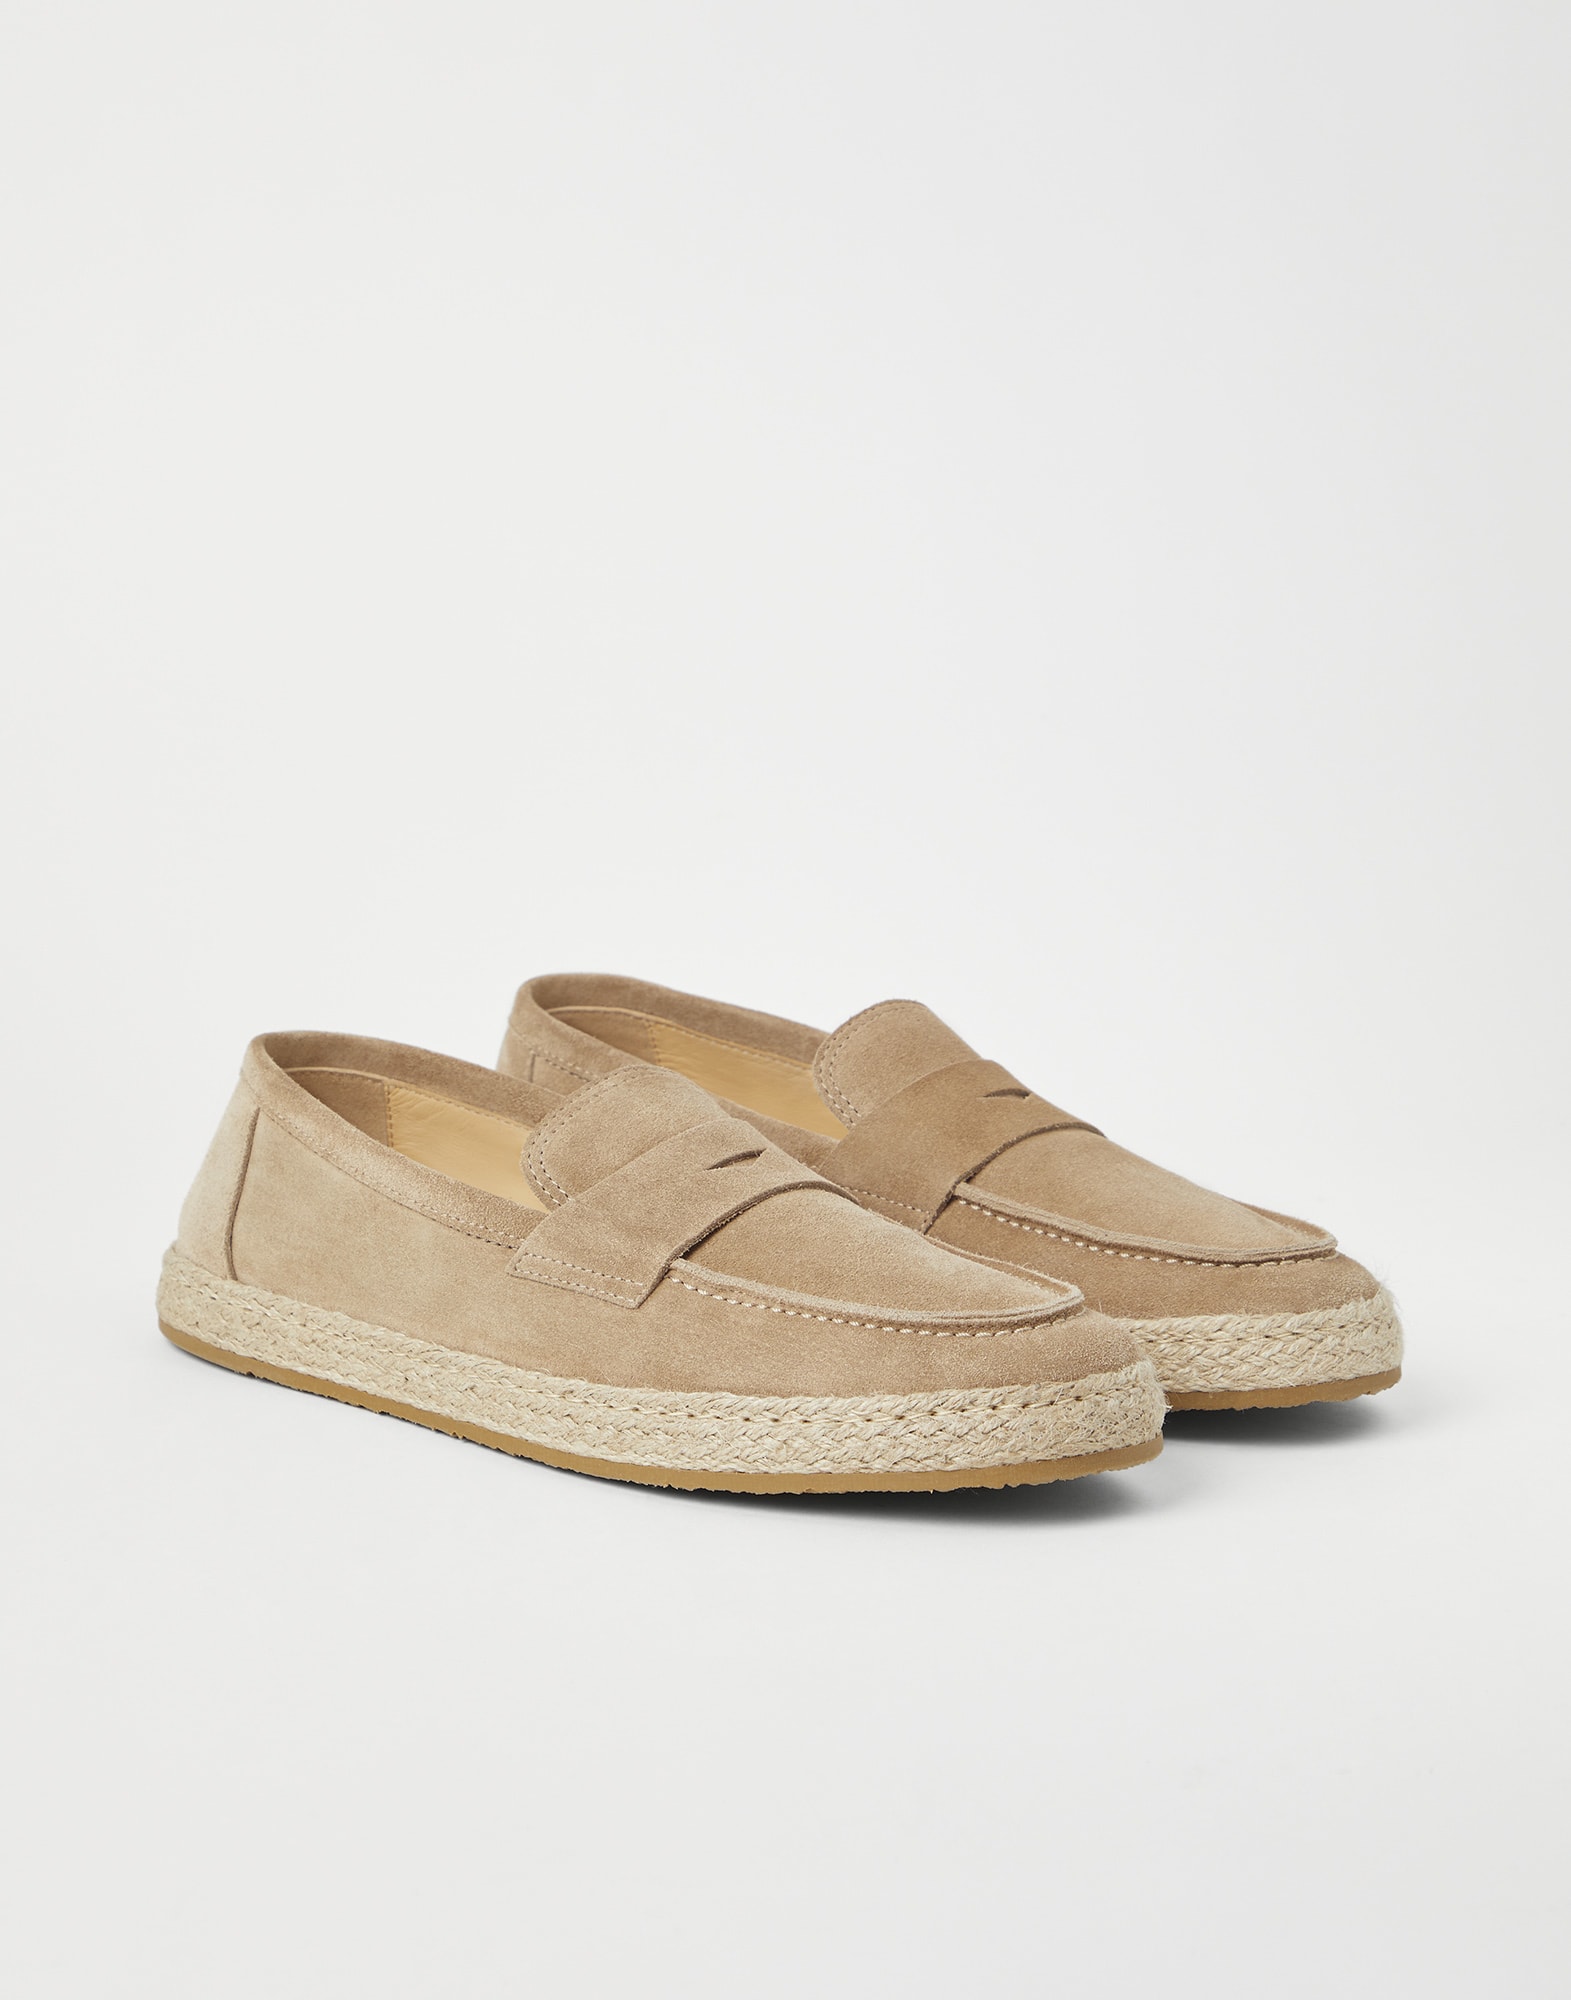 Loafer sneakers